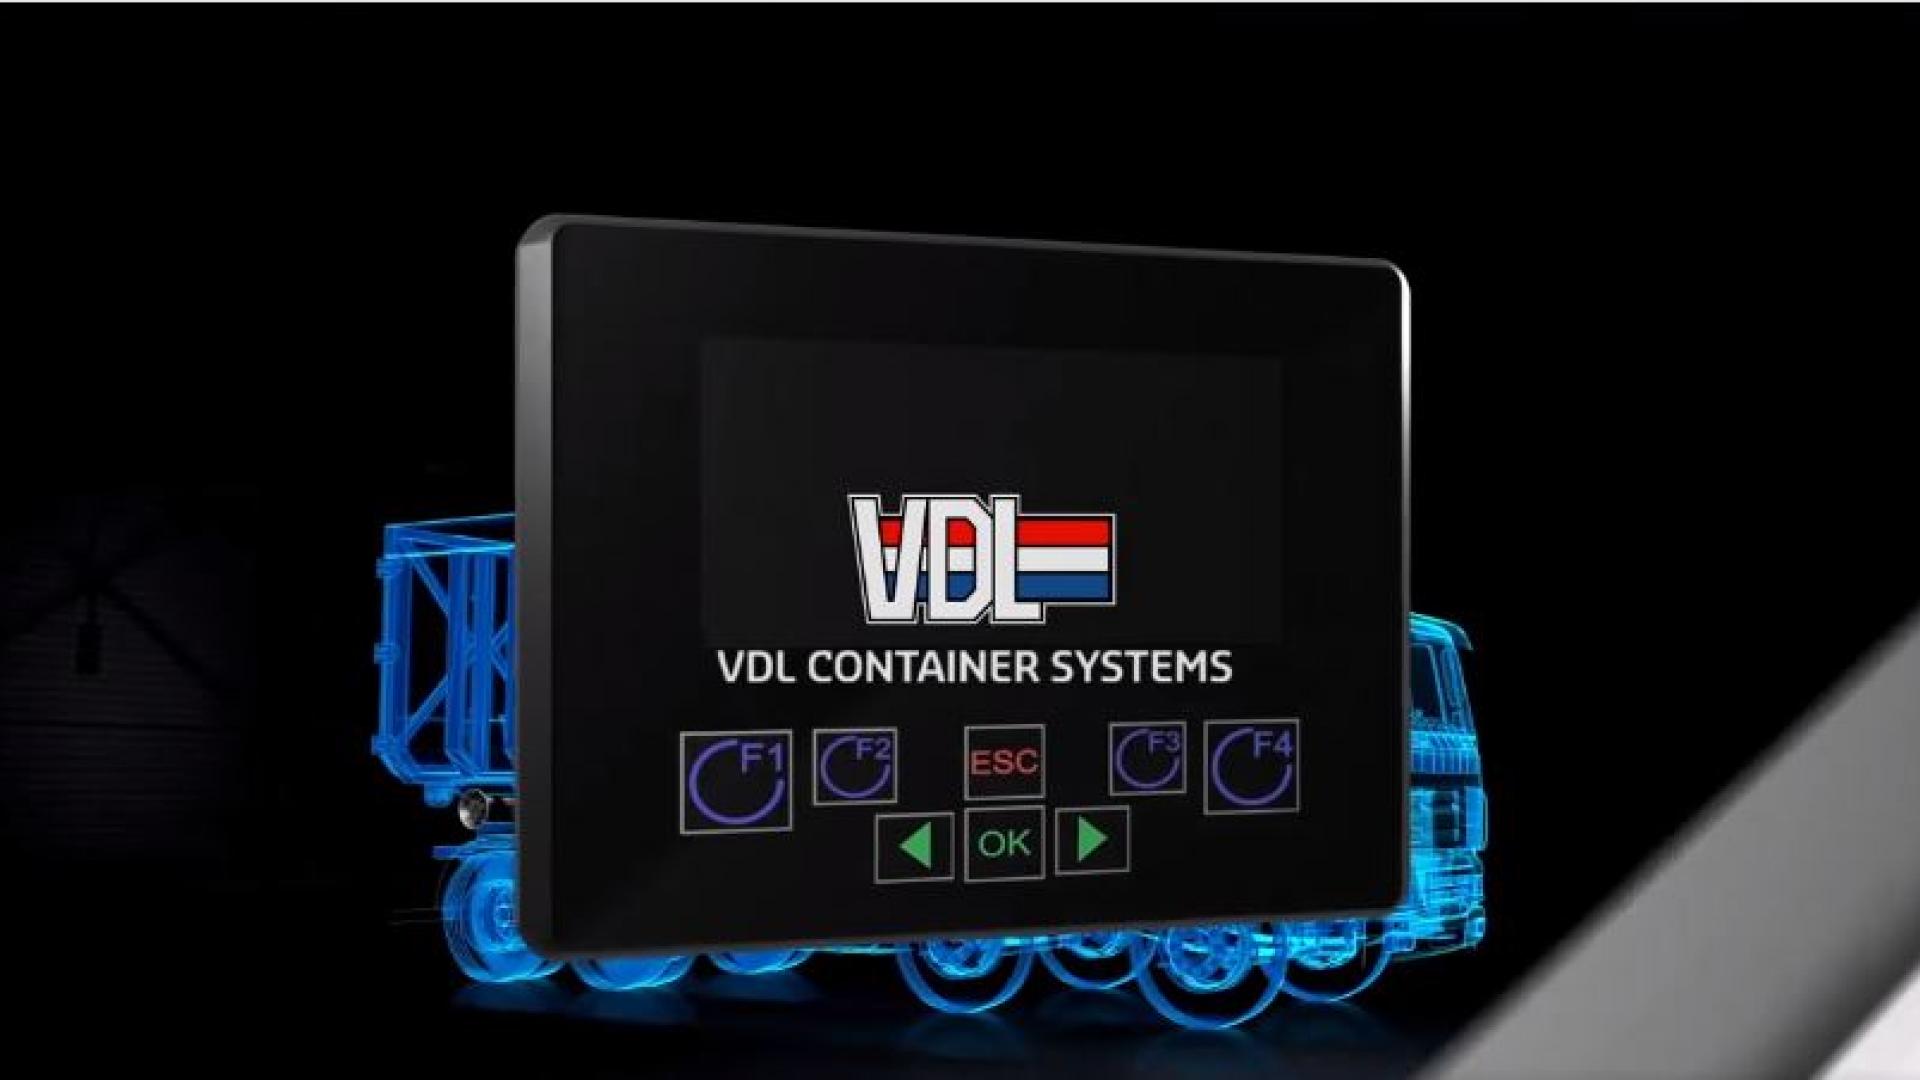 VDL shows its new controller with display at Bauma